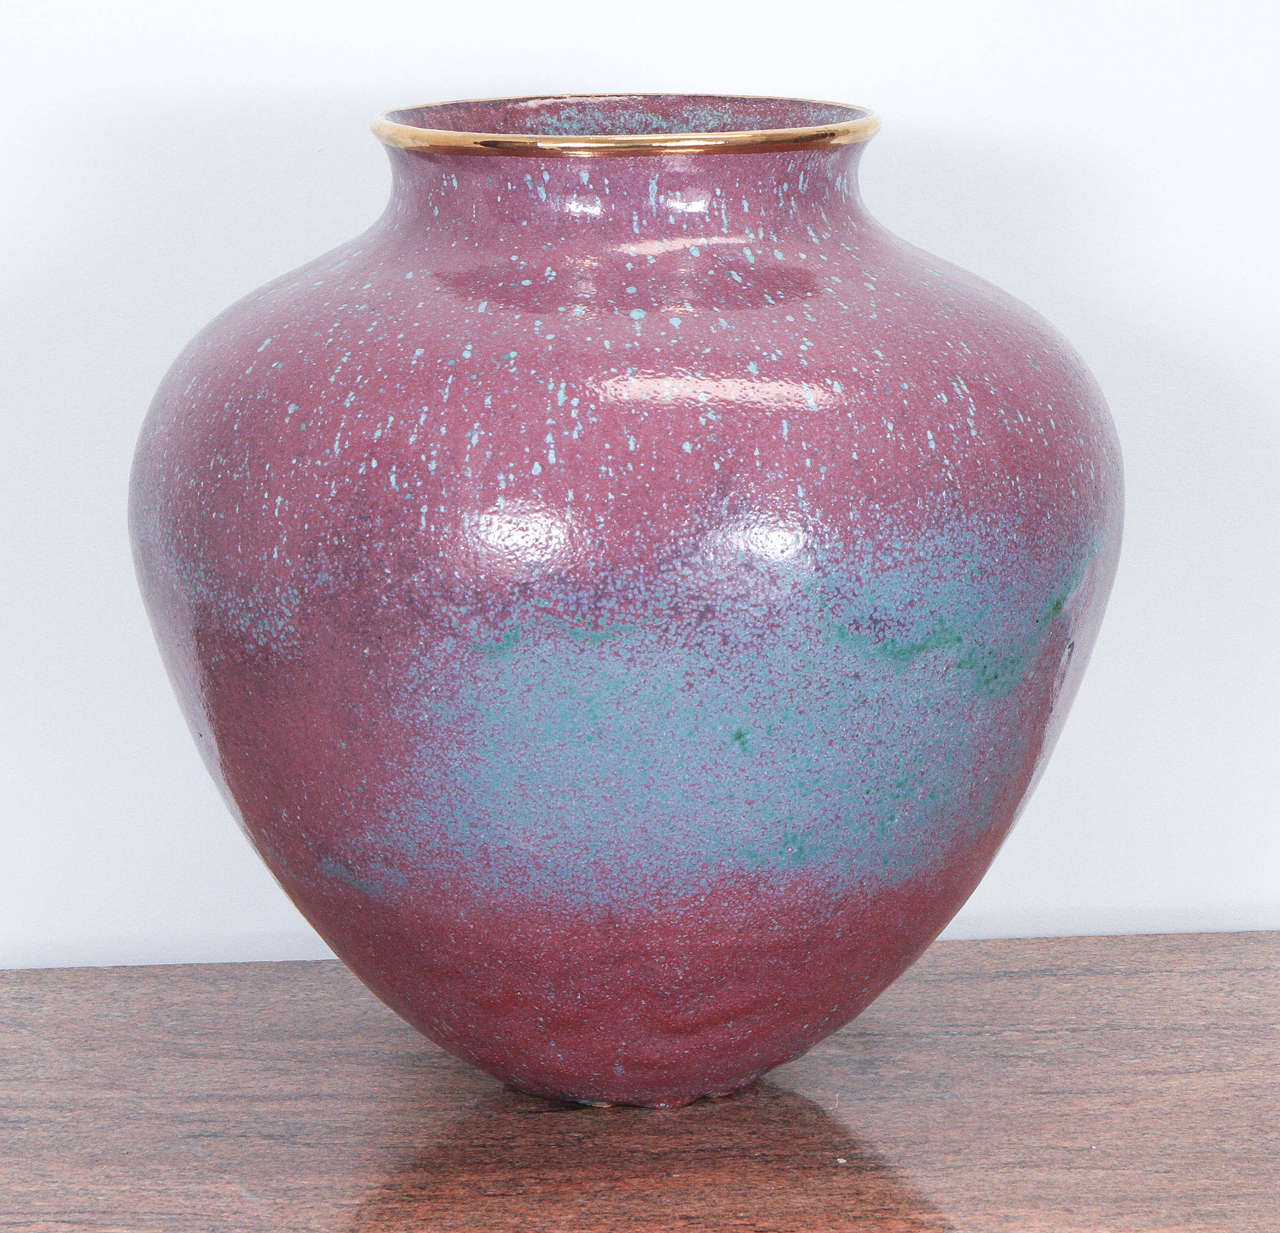 Spectacular large ceramic vase with a beautiful dusky rose crystalline glaze finish. The glaze finish has a mottled effect with hints of teal and gilded lip. 
The vase was custom-made by Steven Klinsky for Mr. Chase and used in a Steve Chase Indian